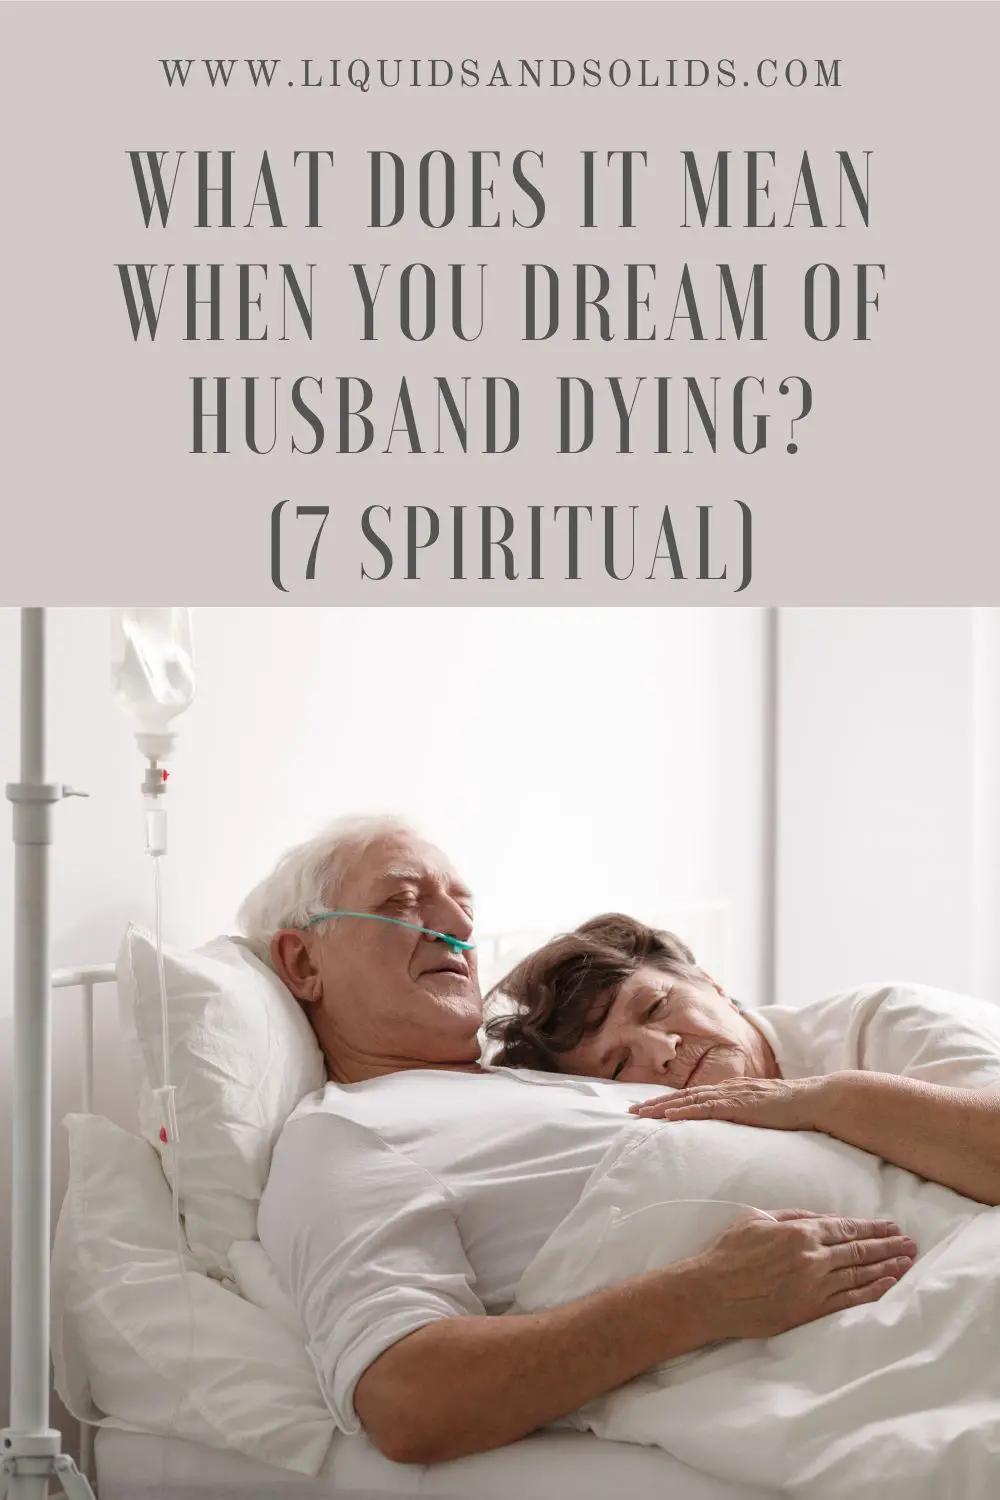 Dreams Of Husband Dying